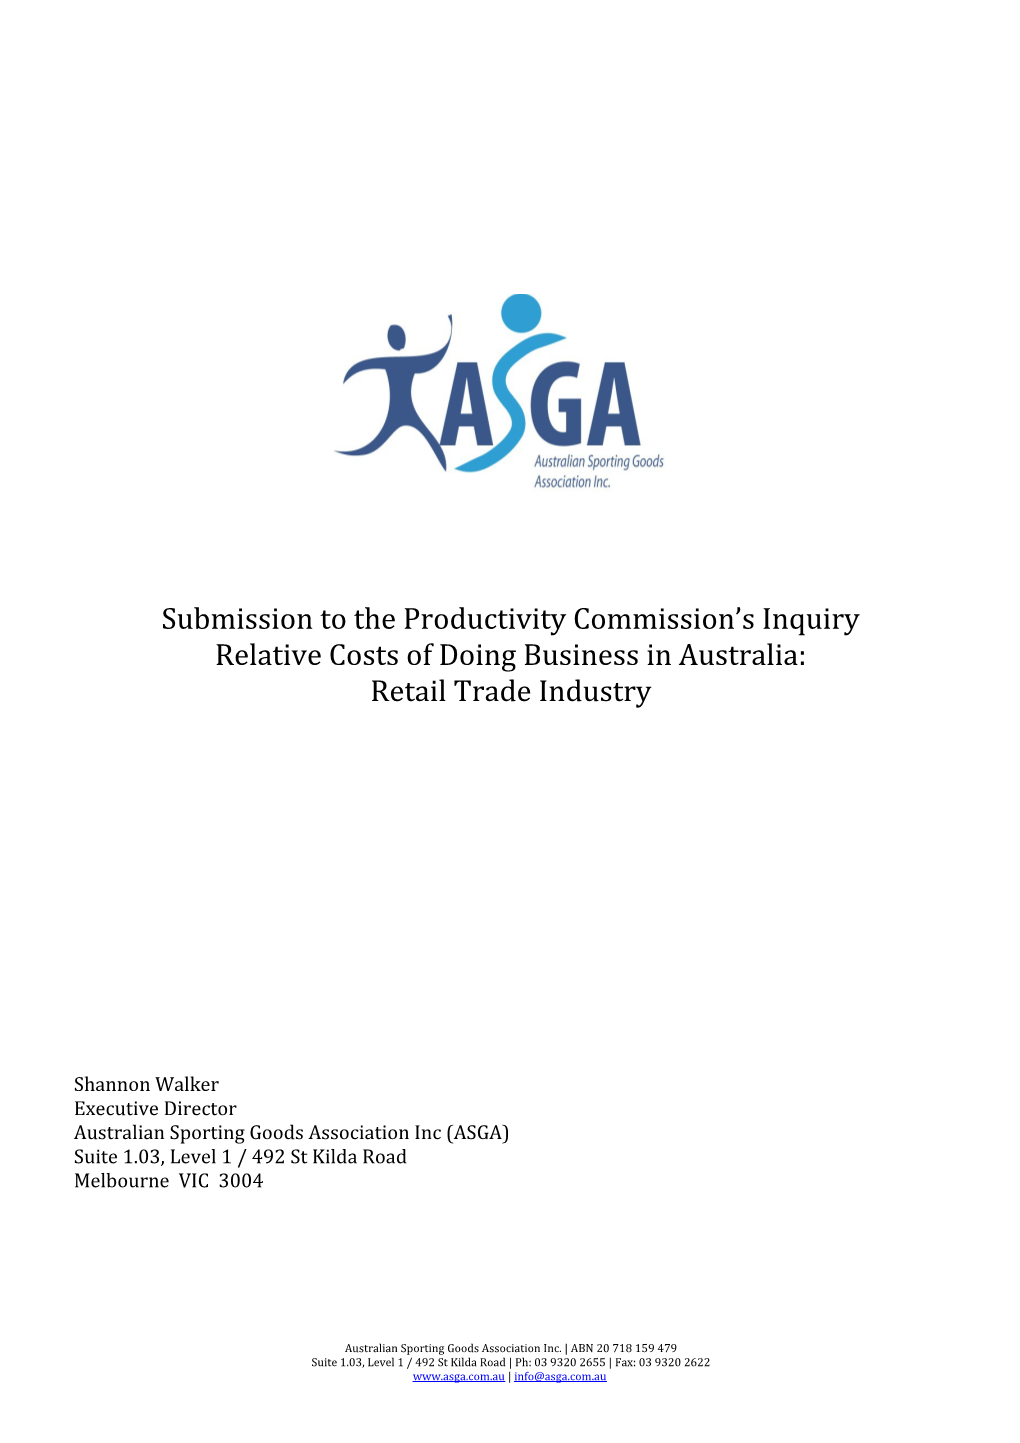 Submission 10 - Australian Sporting Goods Association (ASGA) - Costs of Doing Business